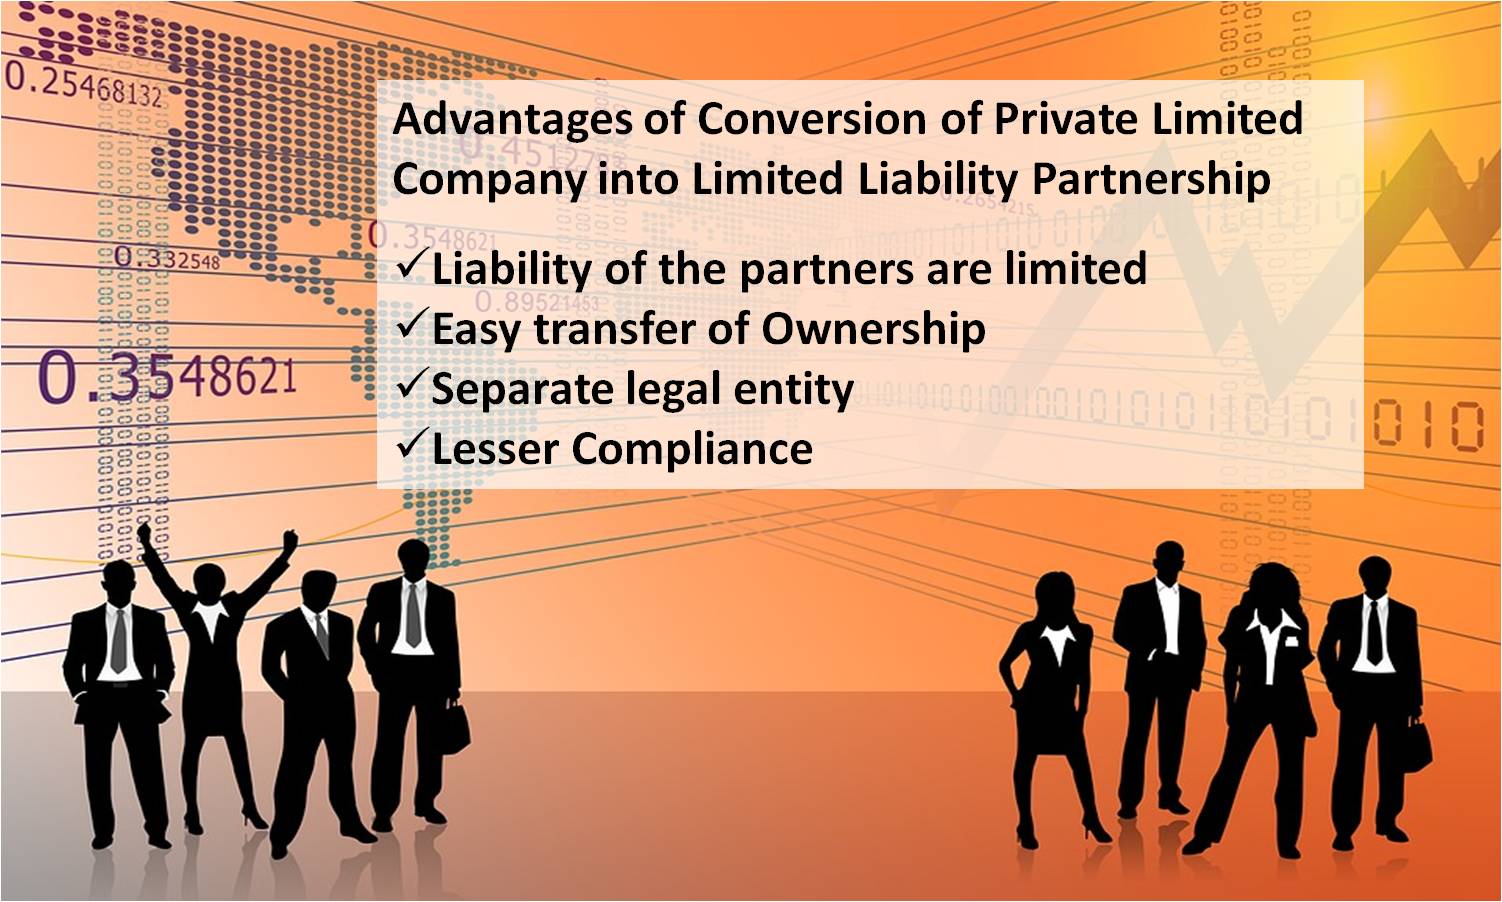 Advantages of Limited Liability Partnership LLP over Partnership firm